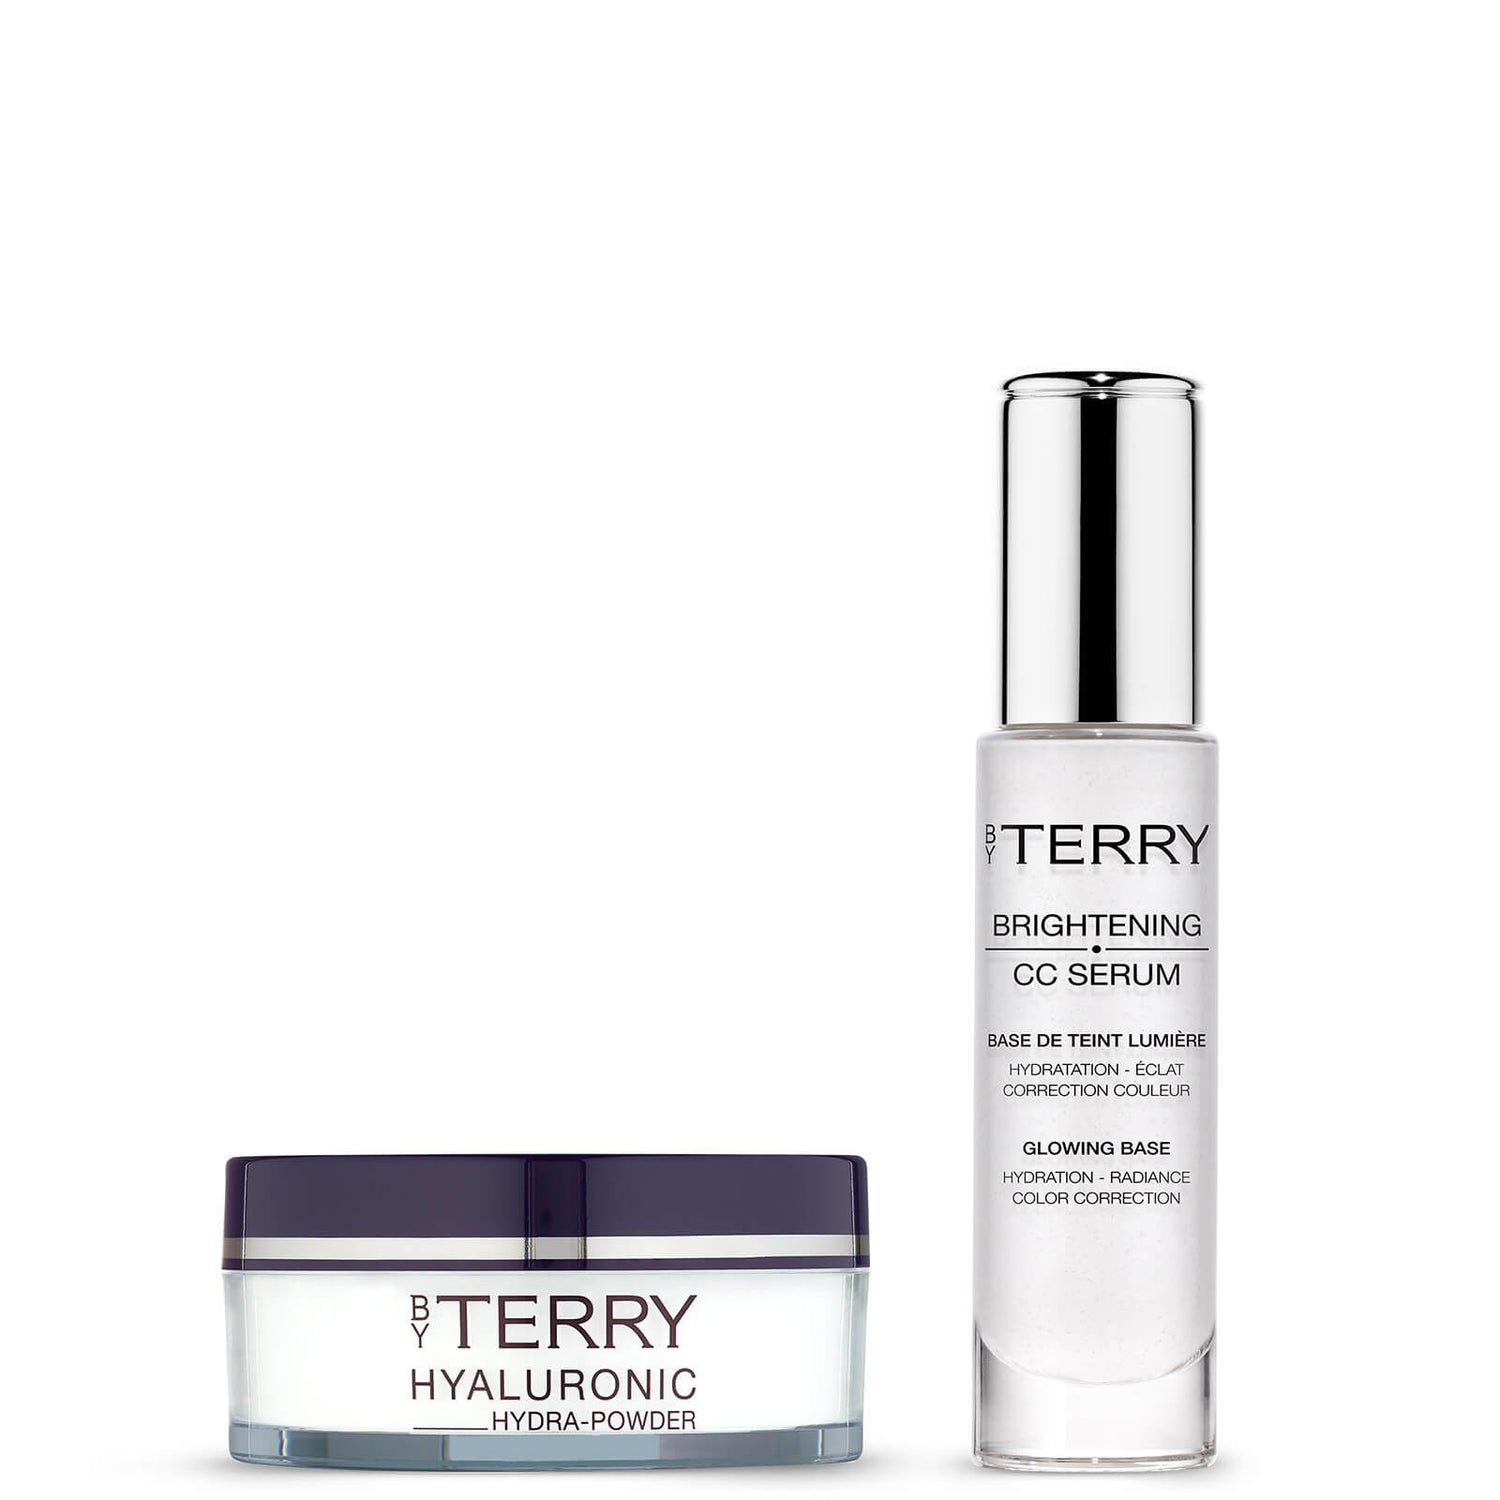 By Terry Hyaluronic Hydra-Powder and Cellularose CC Serum - No.1 Immaculate Light Bundle (Worth £103.00)